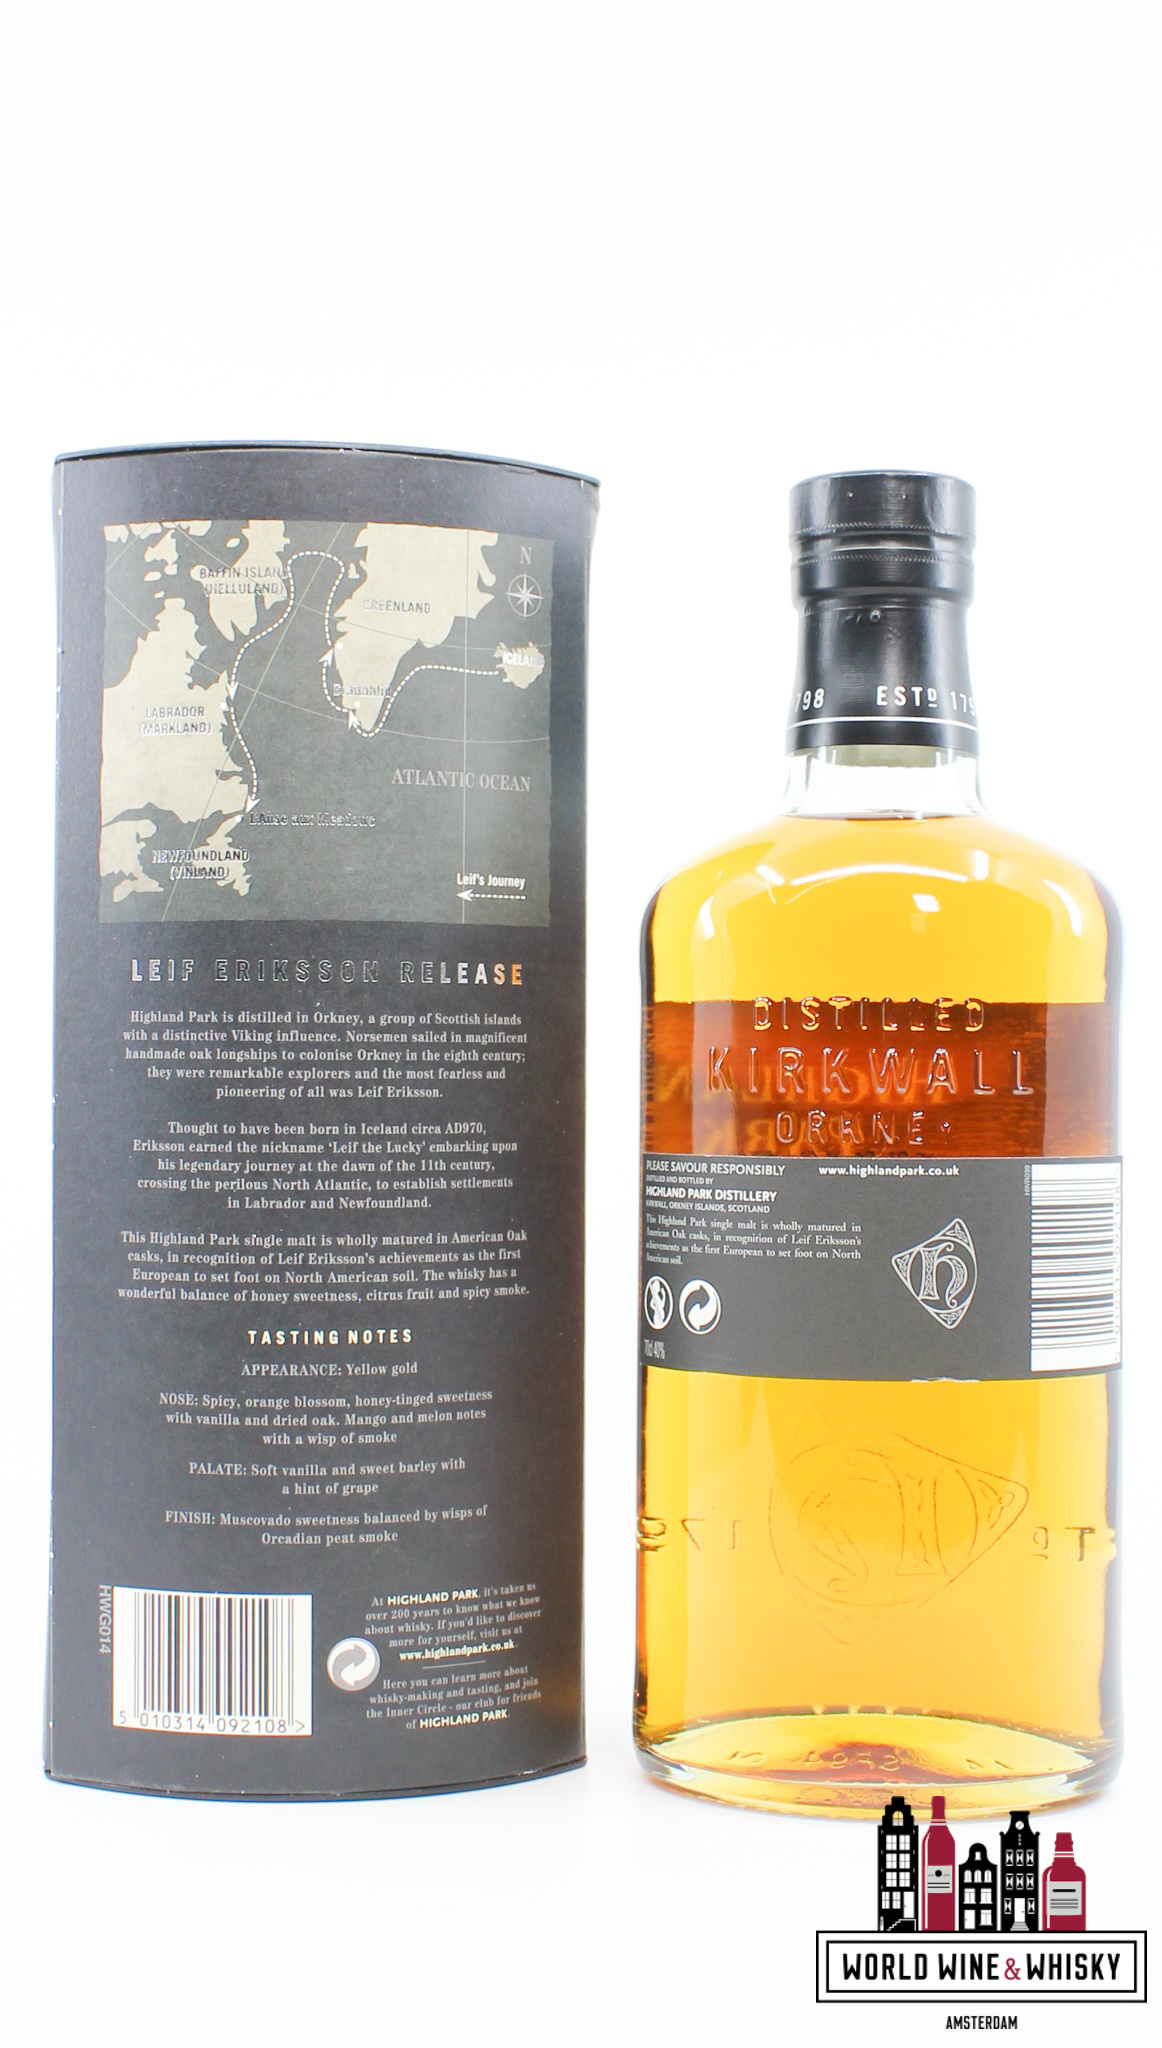 Highland Park Highland Park 2011 - Leif Eriksson Release - Limited Edition - Global Travel Retail Exclusive 40%